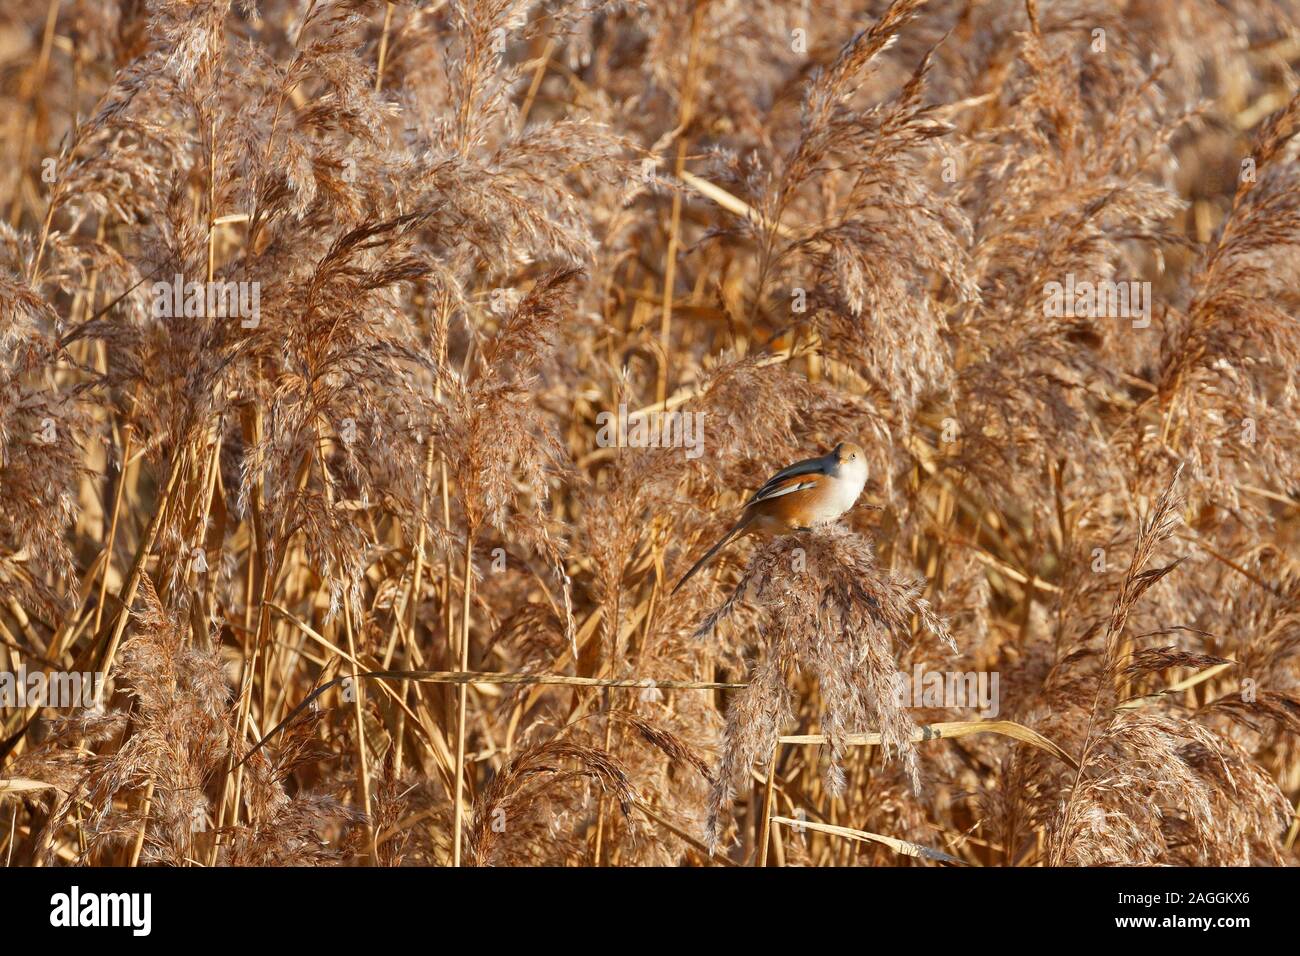 Female bearded reedling frequently known as a bearded tit, Panurus biarmicus feeding on reedbed seed, England, UK. Stock Photo